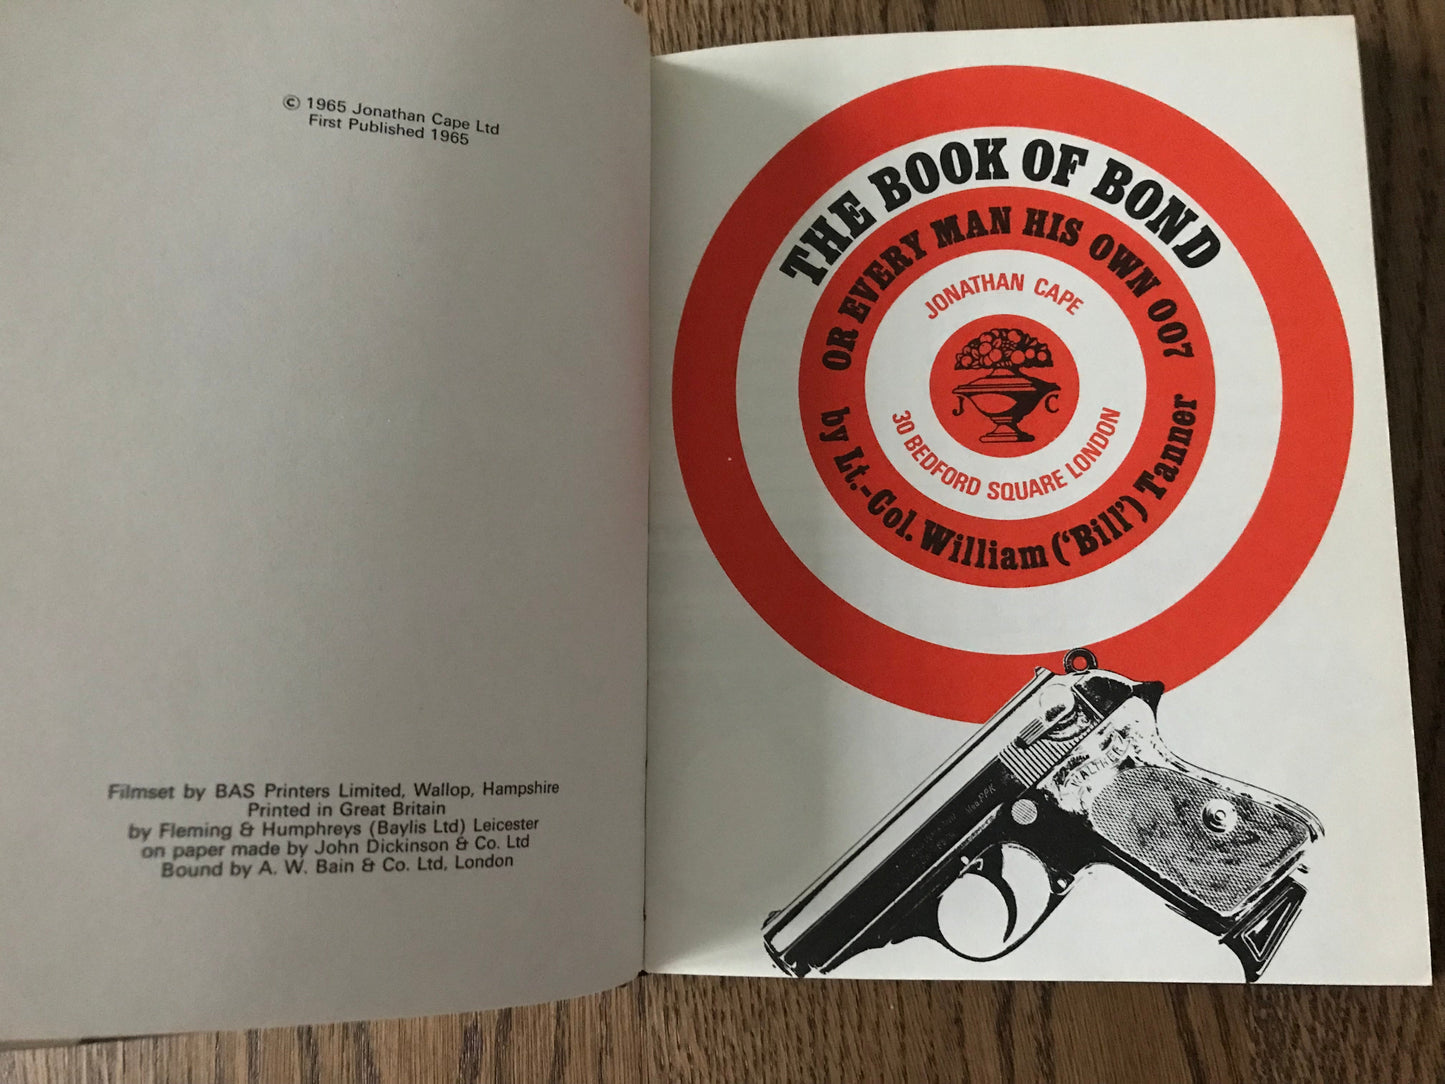 THE BOOK OF BOND - BY LT.-COL. WILLIAM ('BILL') TANNER BooksCardsNBikes